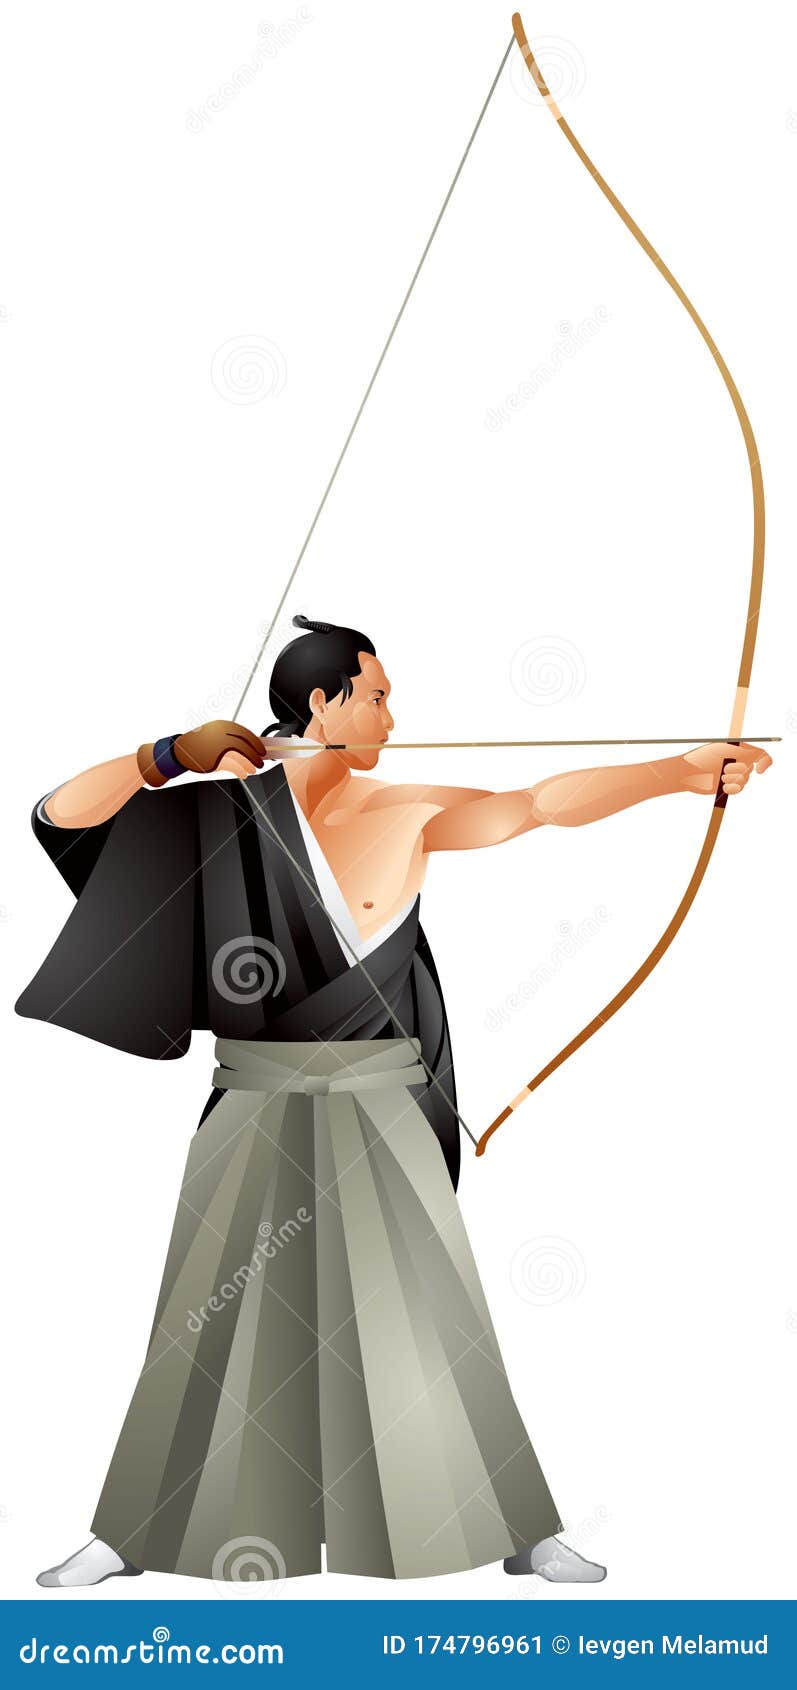 Traditional Archery Stock Illustrations 2 879 Traditional Archery Stock Illustrations Vectors Clipart Dreamstime